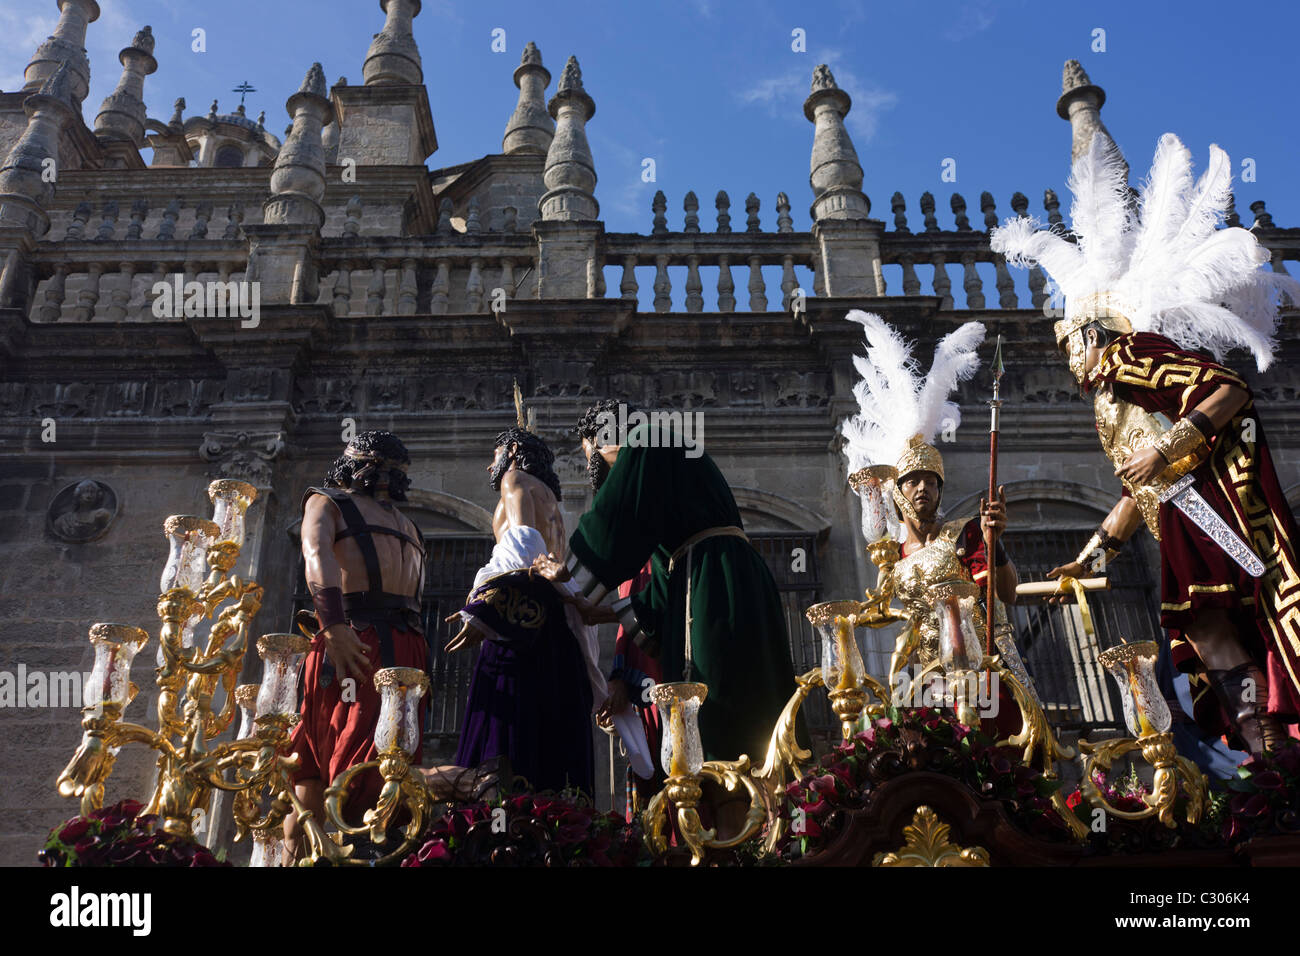 The Holy Paso depicting the Crucifixion passes through Seville during its annual Semana Santa Easter passion processions. Stock Photo